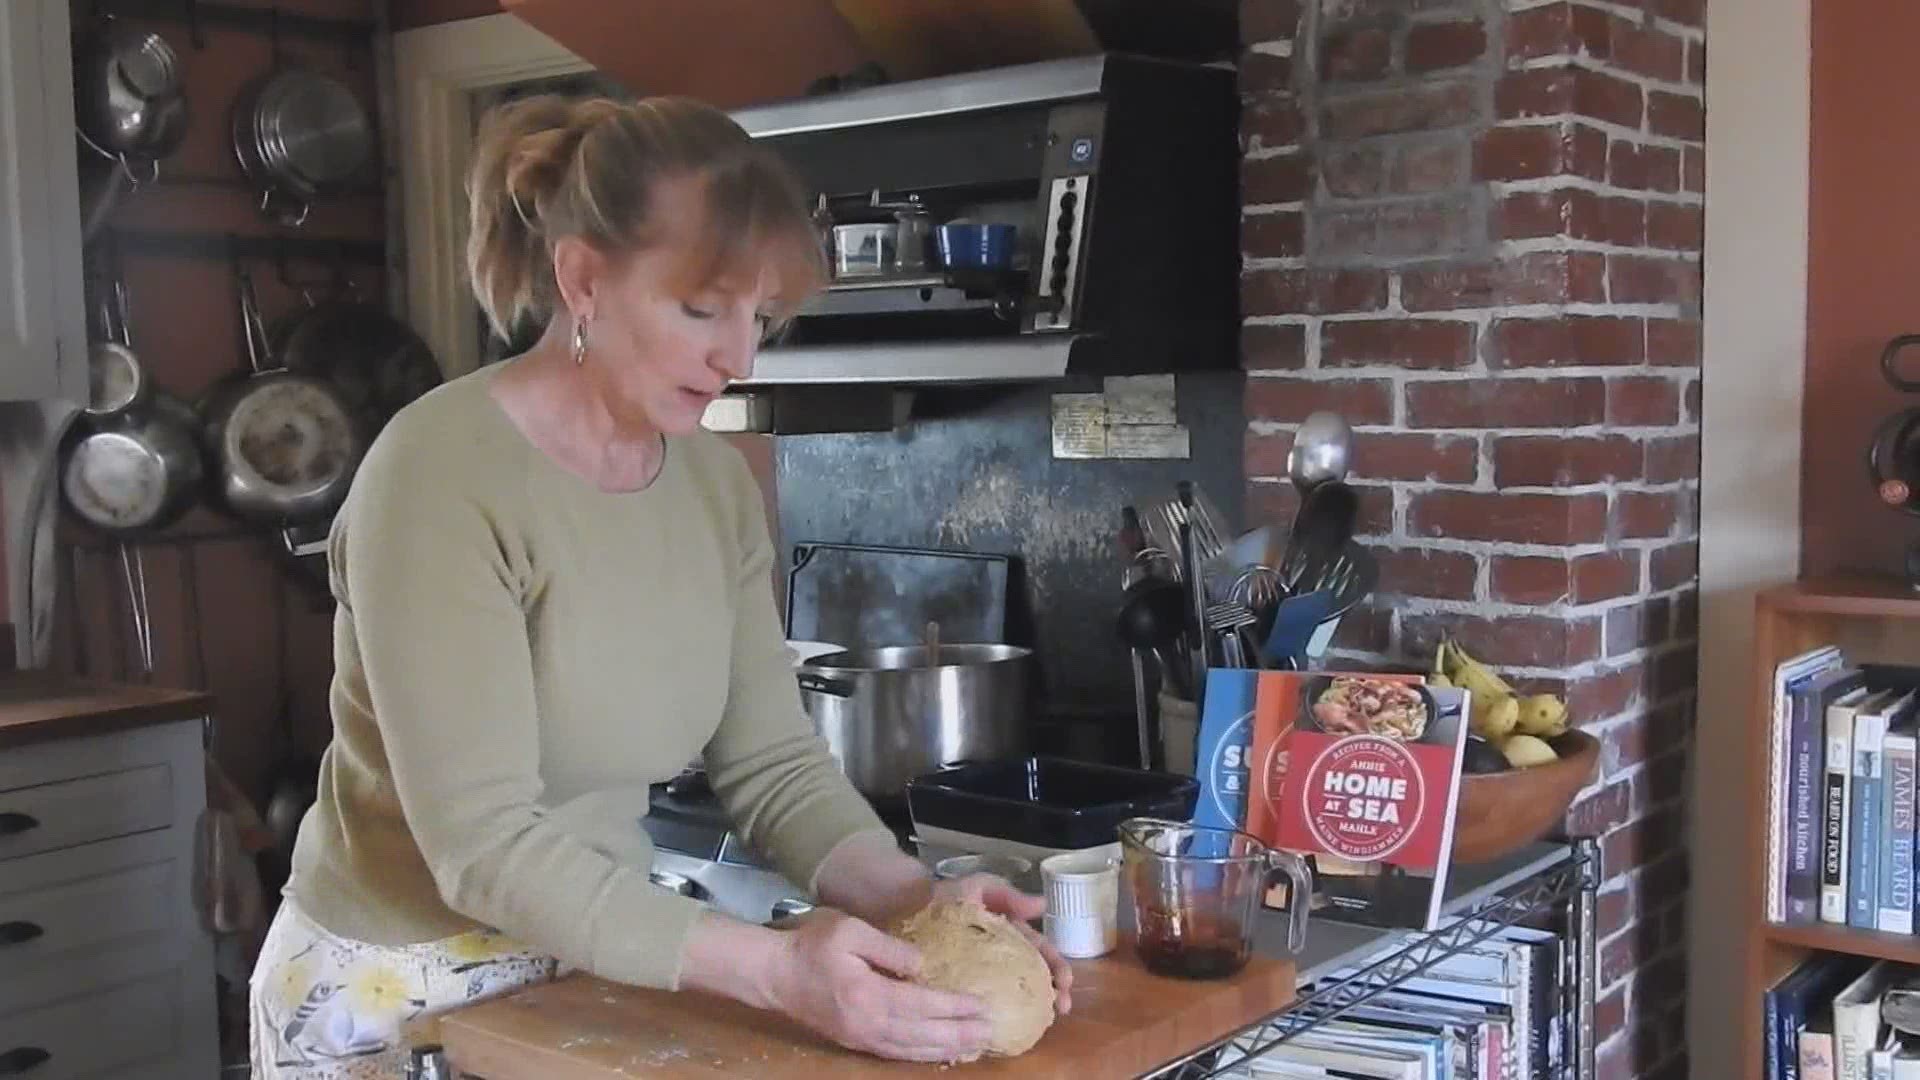 Baking at home? This recipe works for a loaf or rolls.